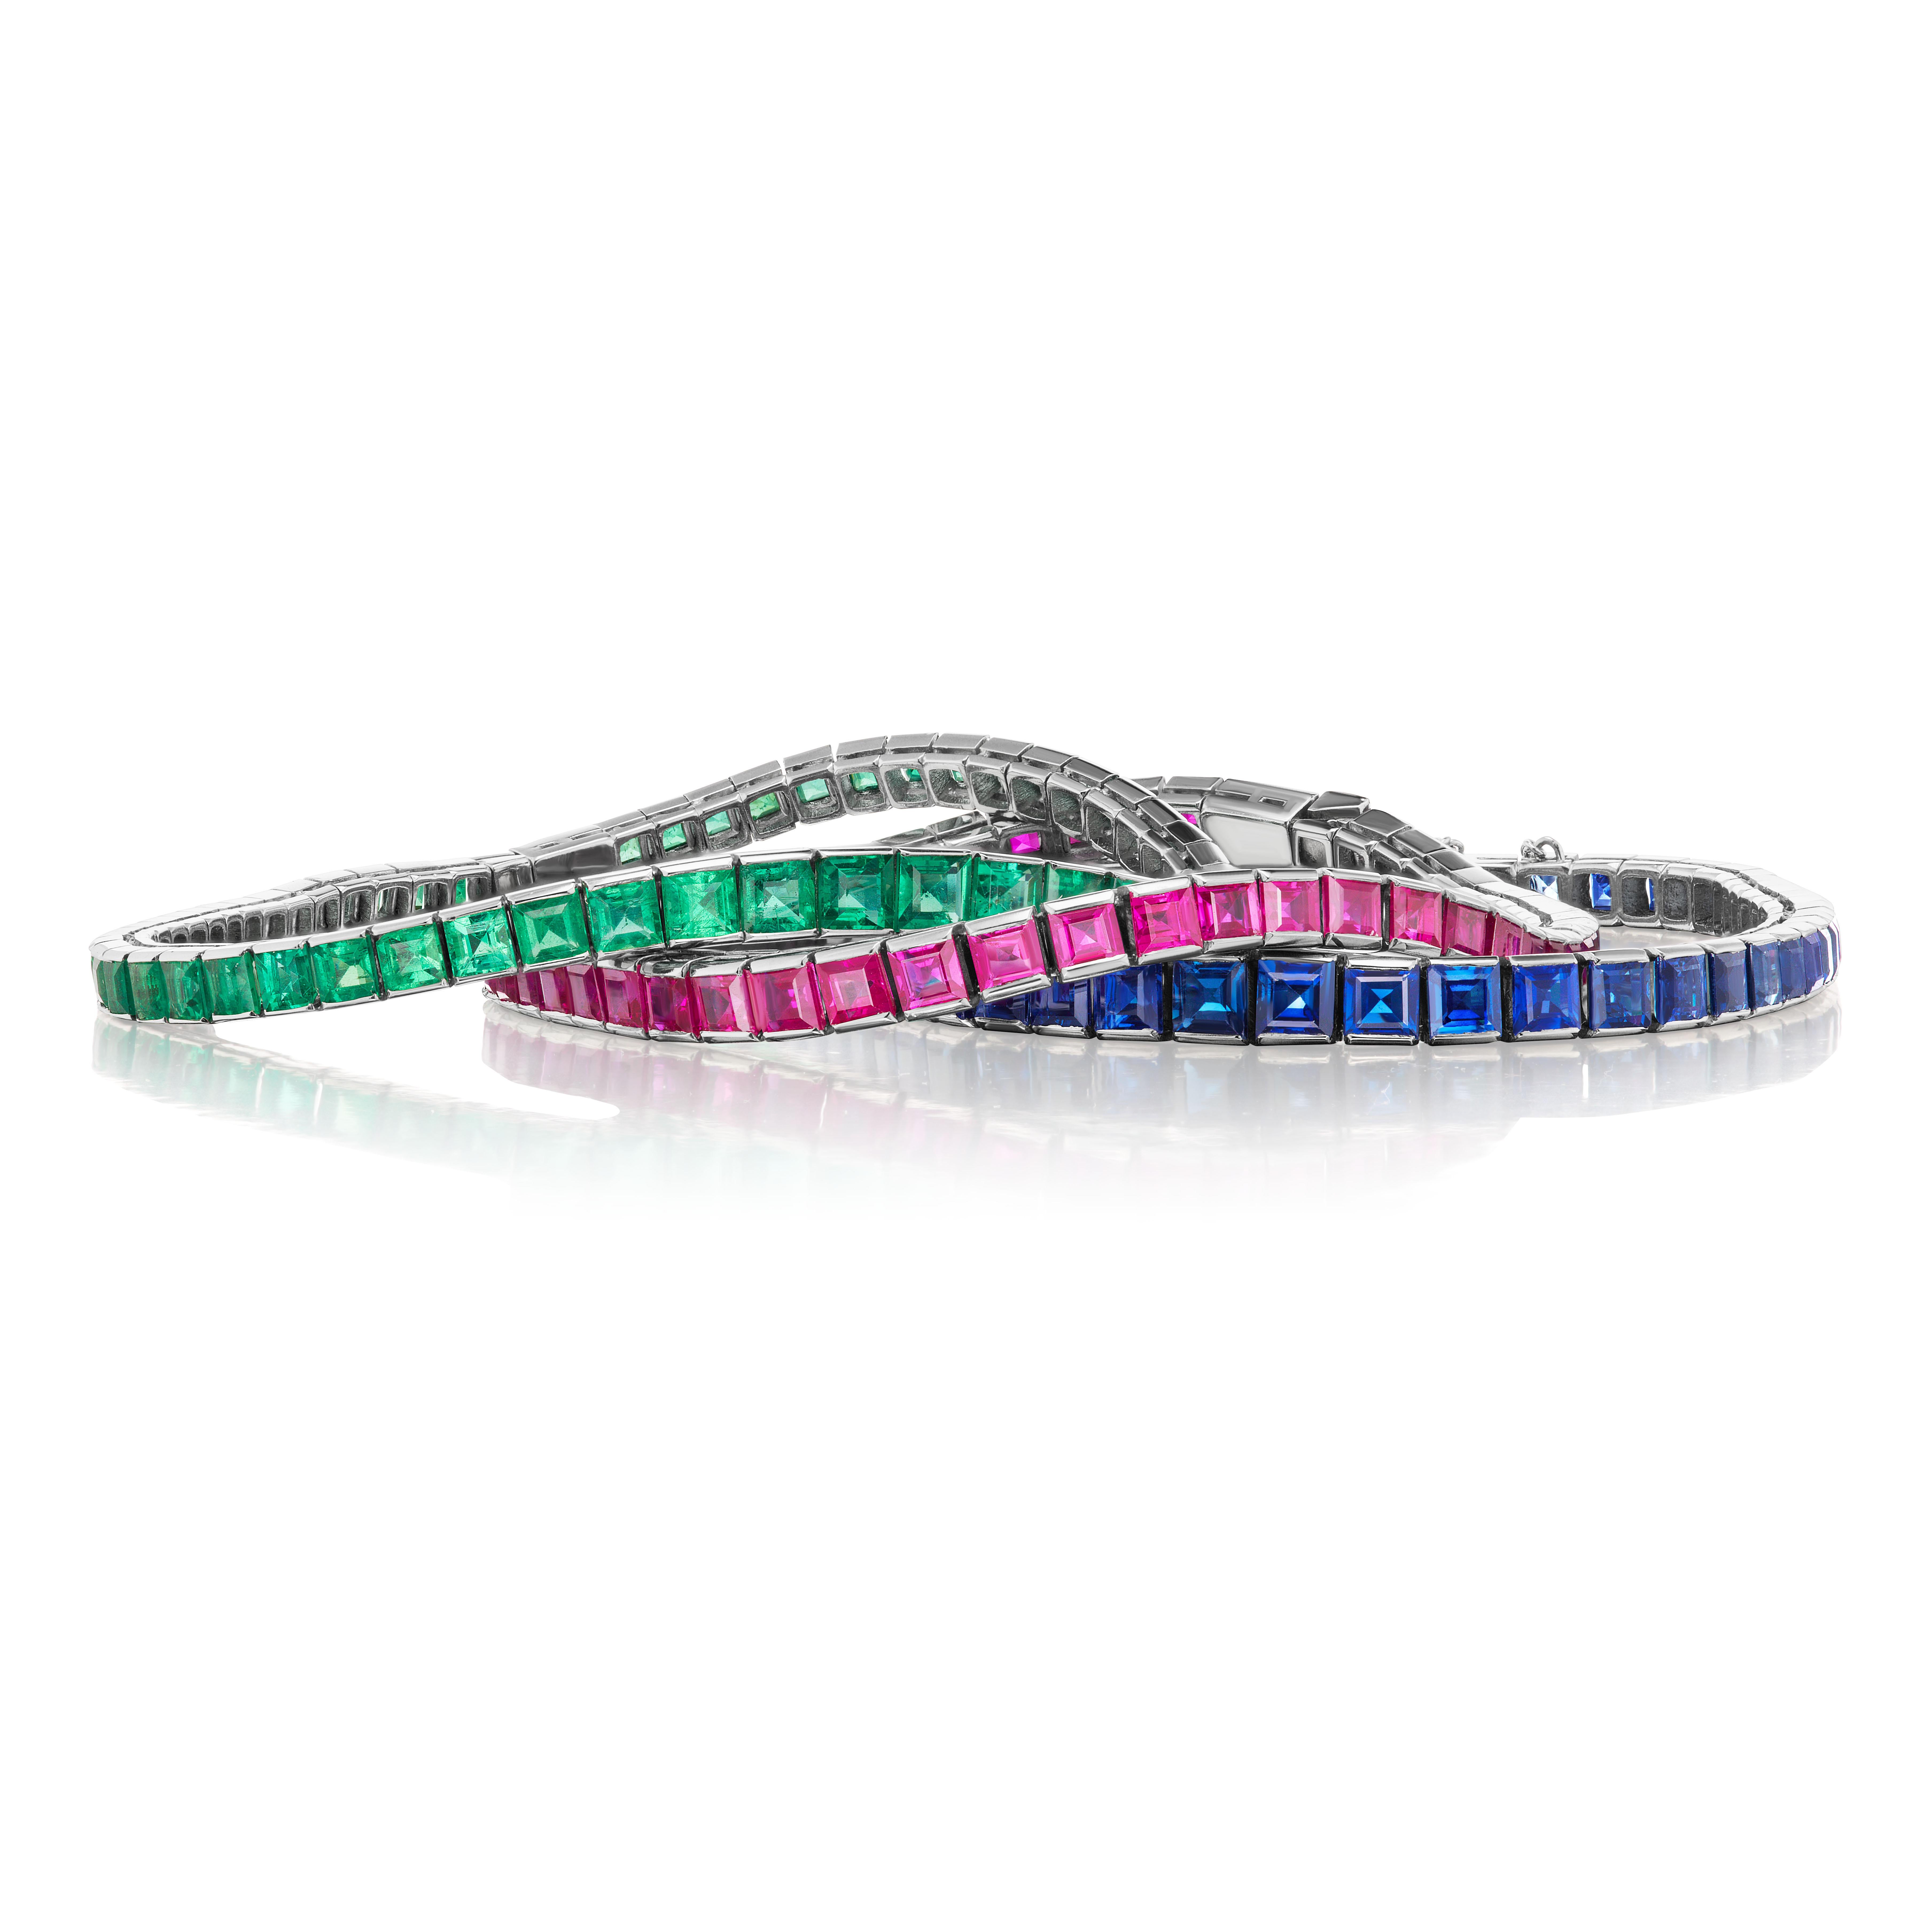 This vintage 3 bracelet set featuring platinum channel set square-cut sapphire, ruby, and emerald bracelets makes a splendid fashion statement. The stones are very clean and are an excellent match in color. Each bracelet graduates slightly larger